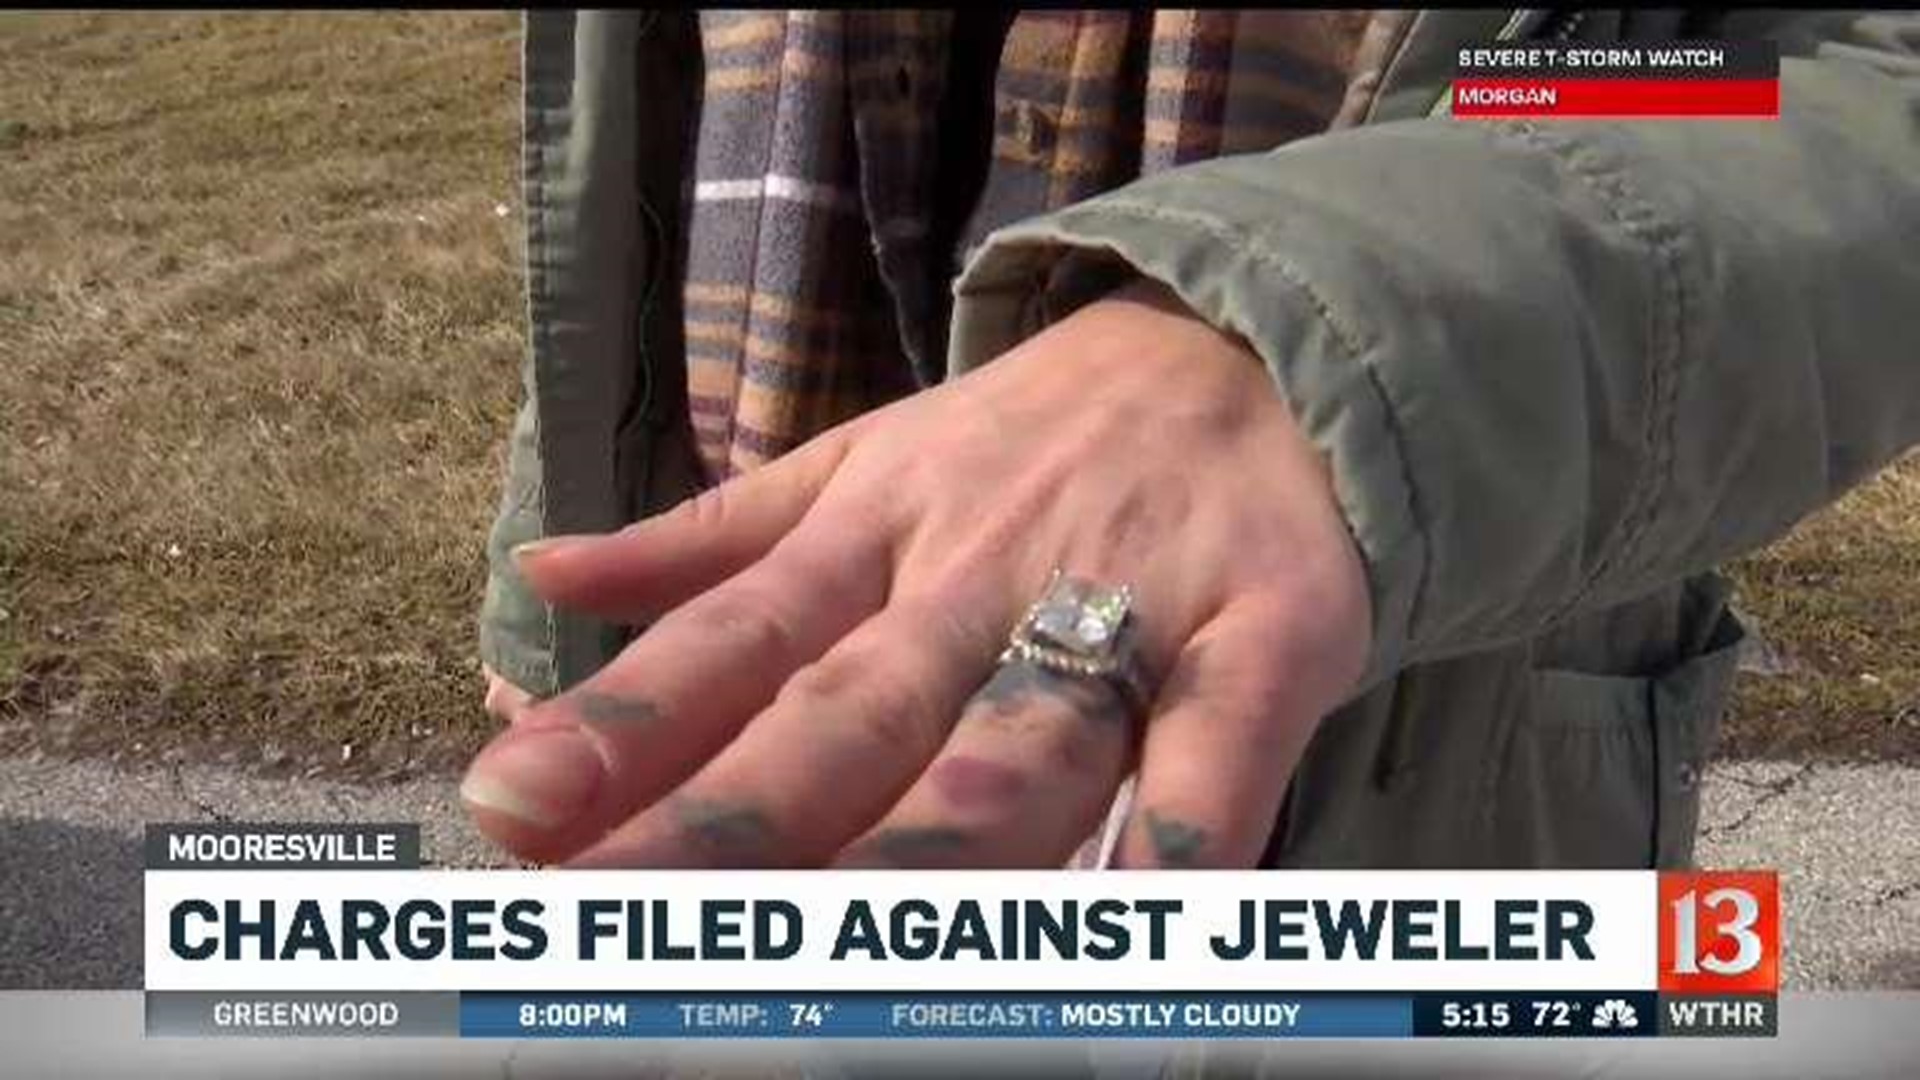 Charges filed against jeweler